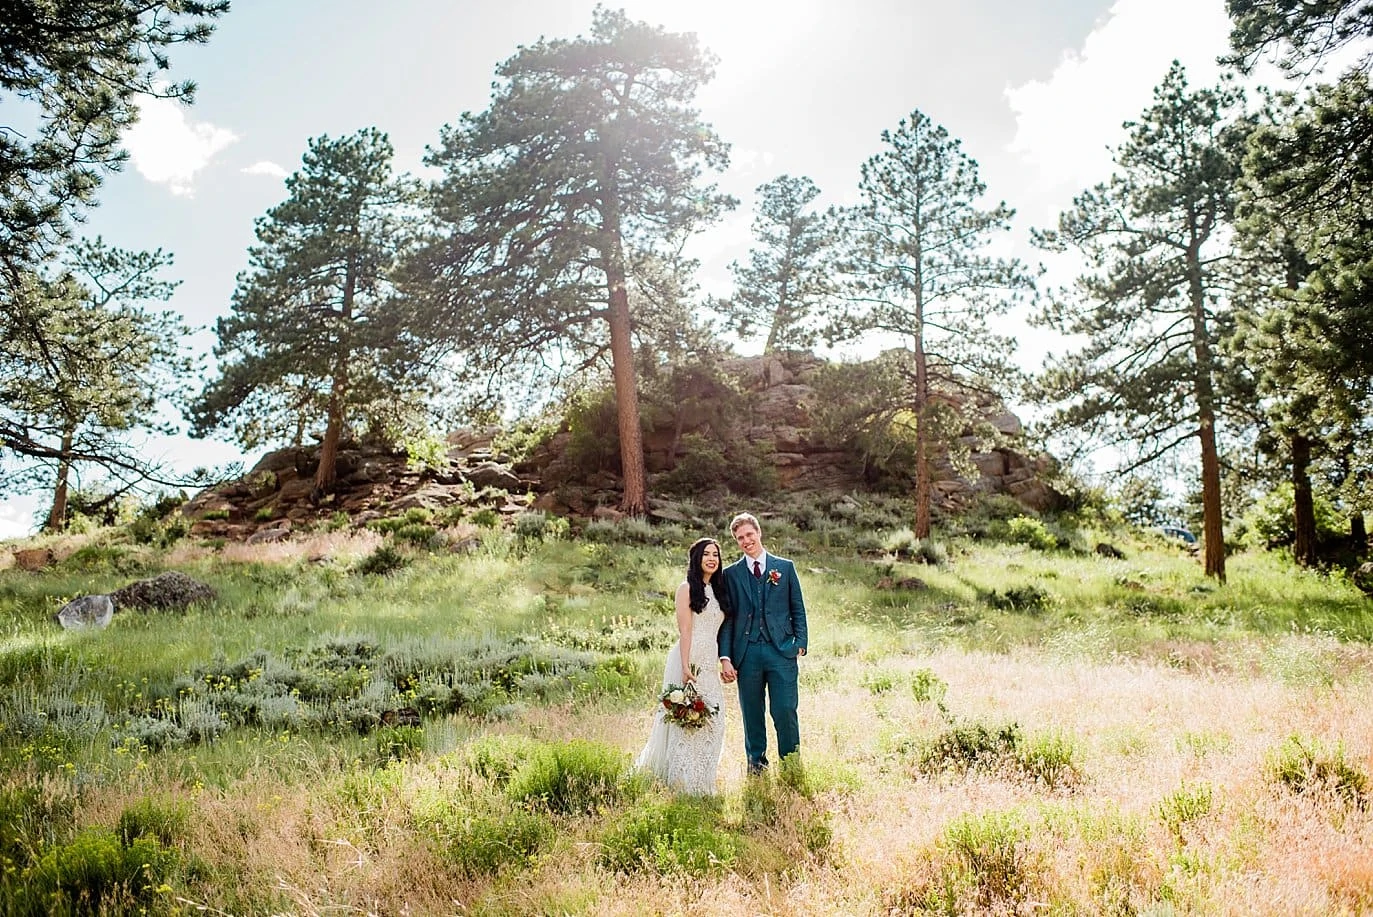 Bride and groom at Rocky Mountain National Park 3M Curve wedding by RMNP Wedding Photography Jennie Crate 